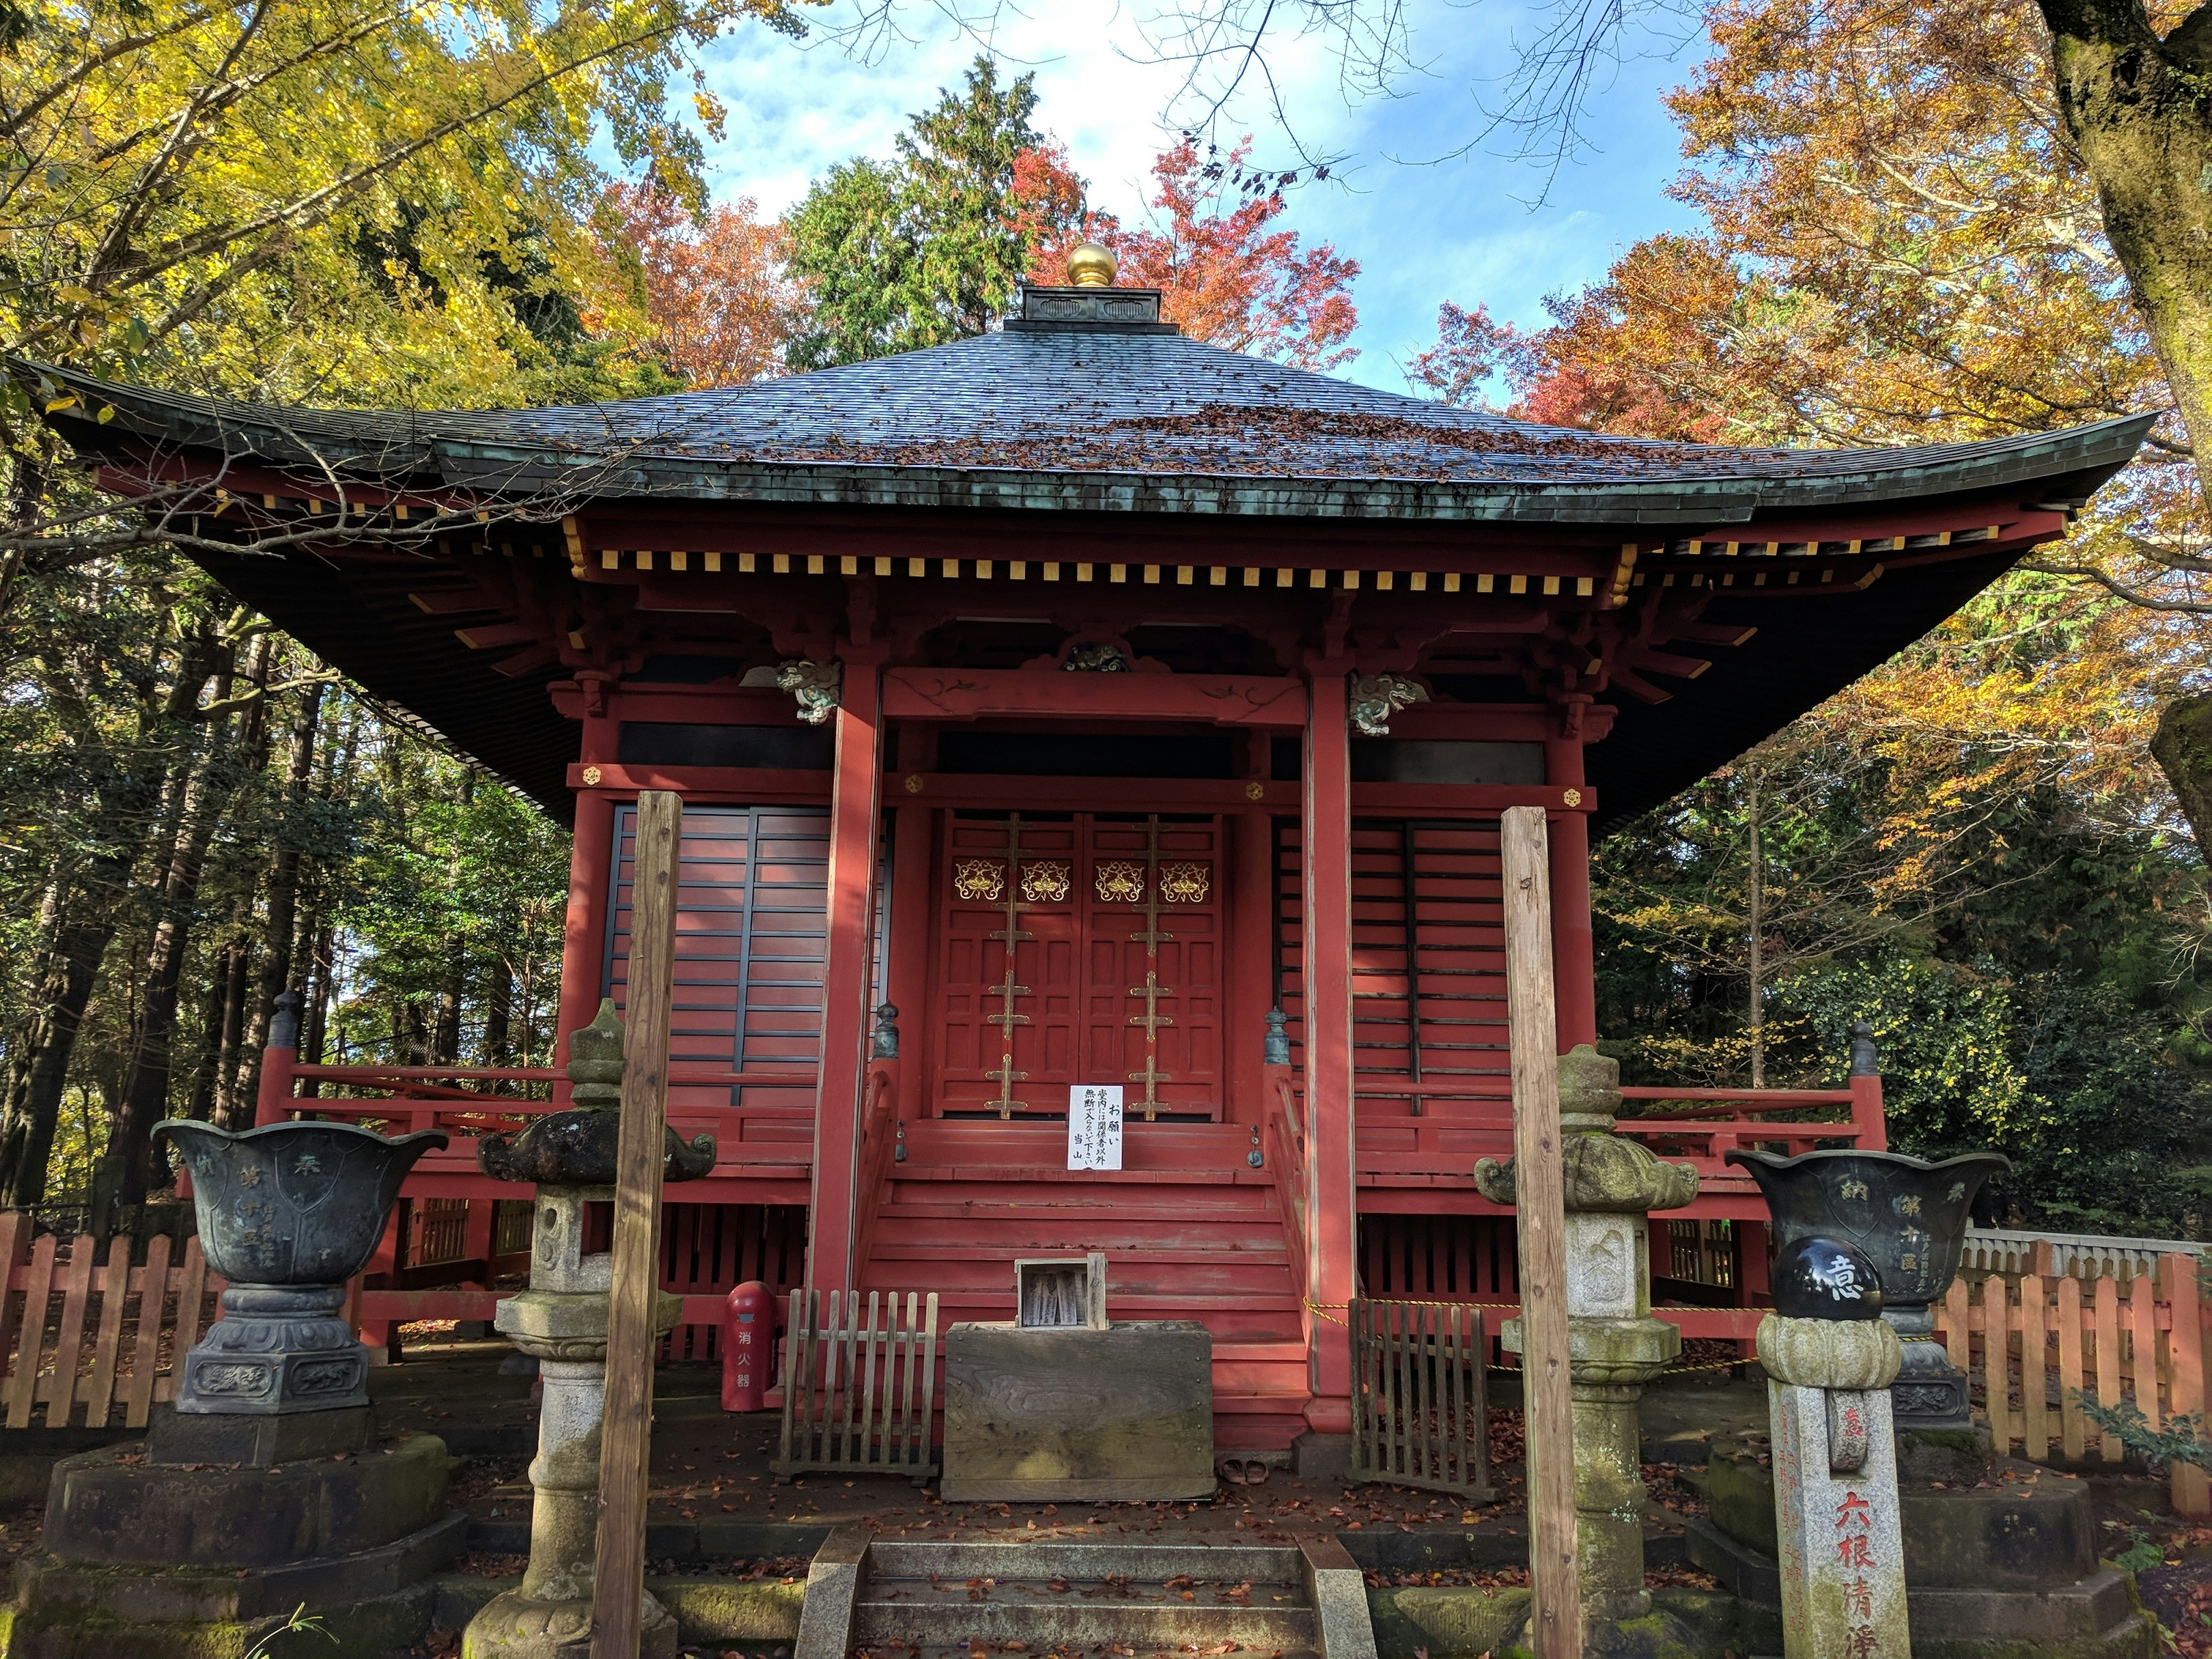 Okunoin Fudo-do Hall, part of the Yakouin Shinto temple complex, on Mt Takao. The temple is a small, square building with red walls and a traditional Japanese-style sloping roof.